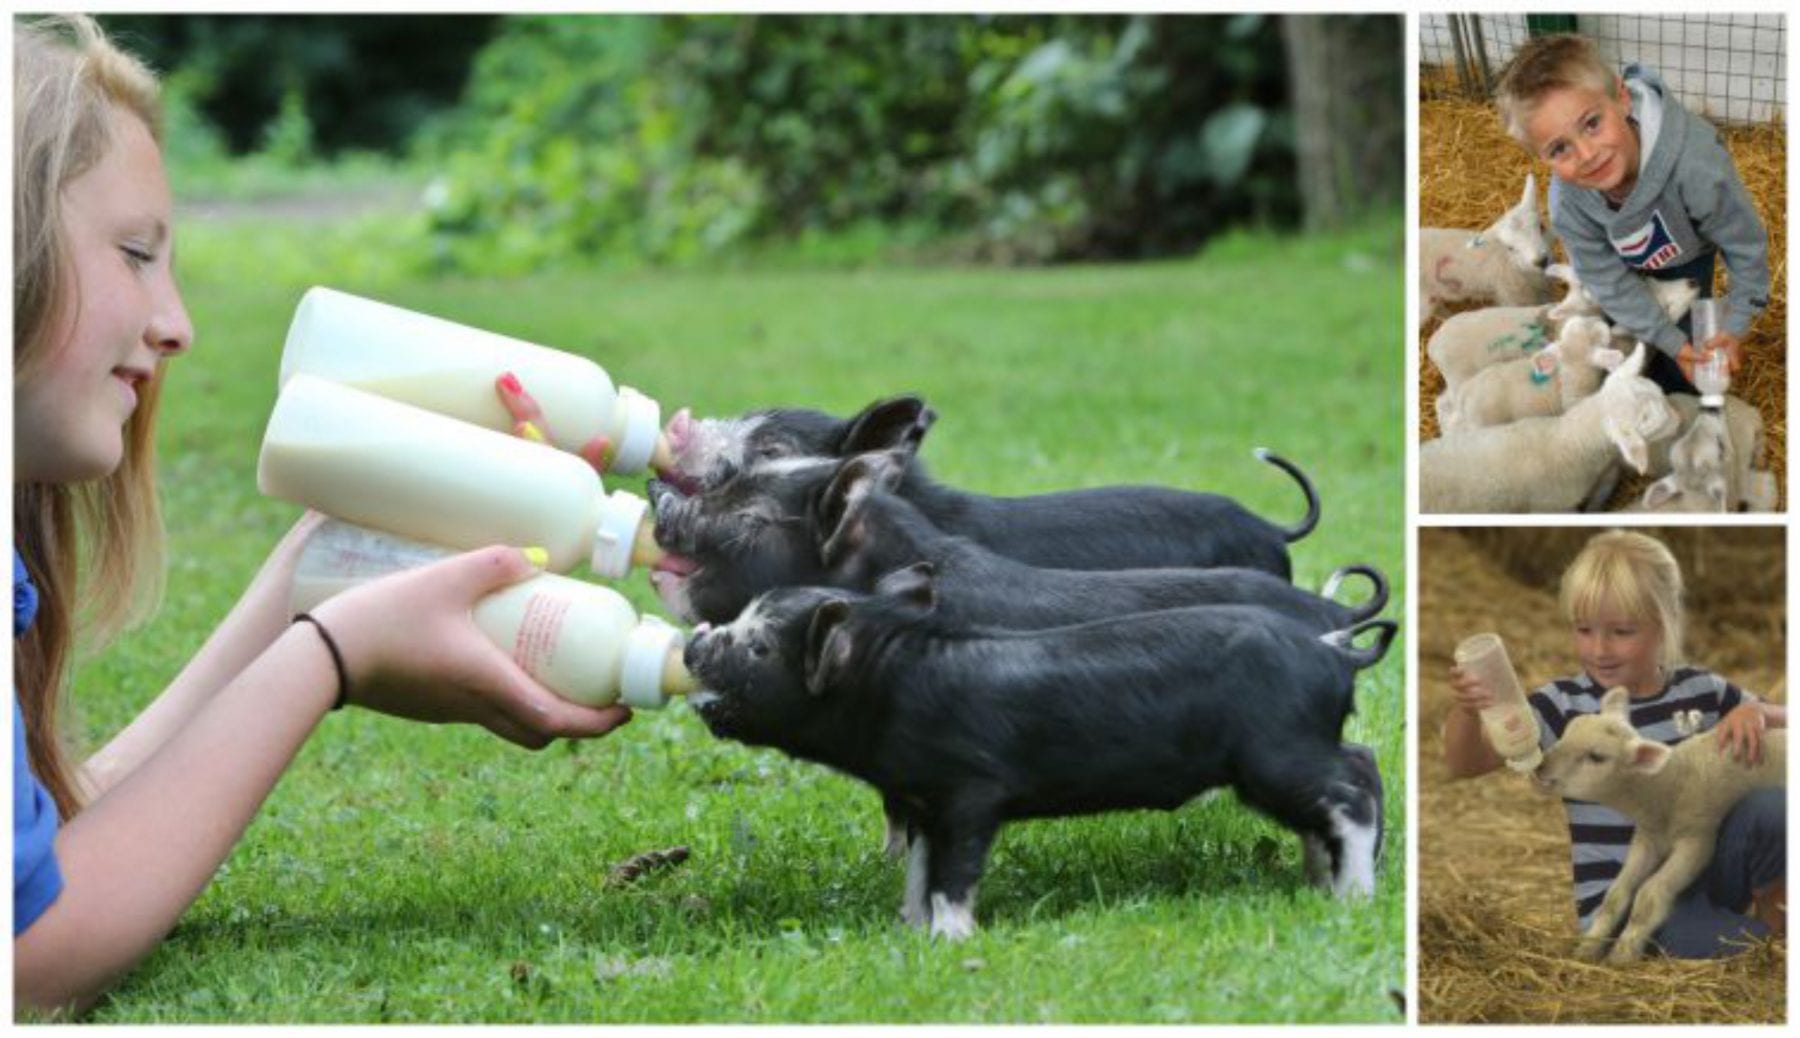 Lambs and piglets being bottle fed by children